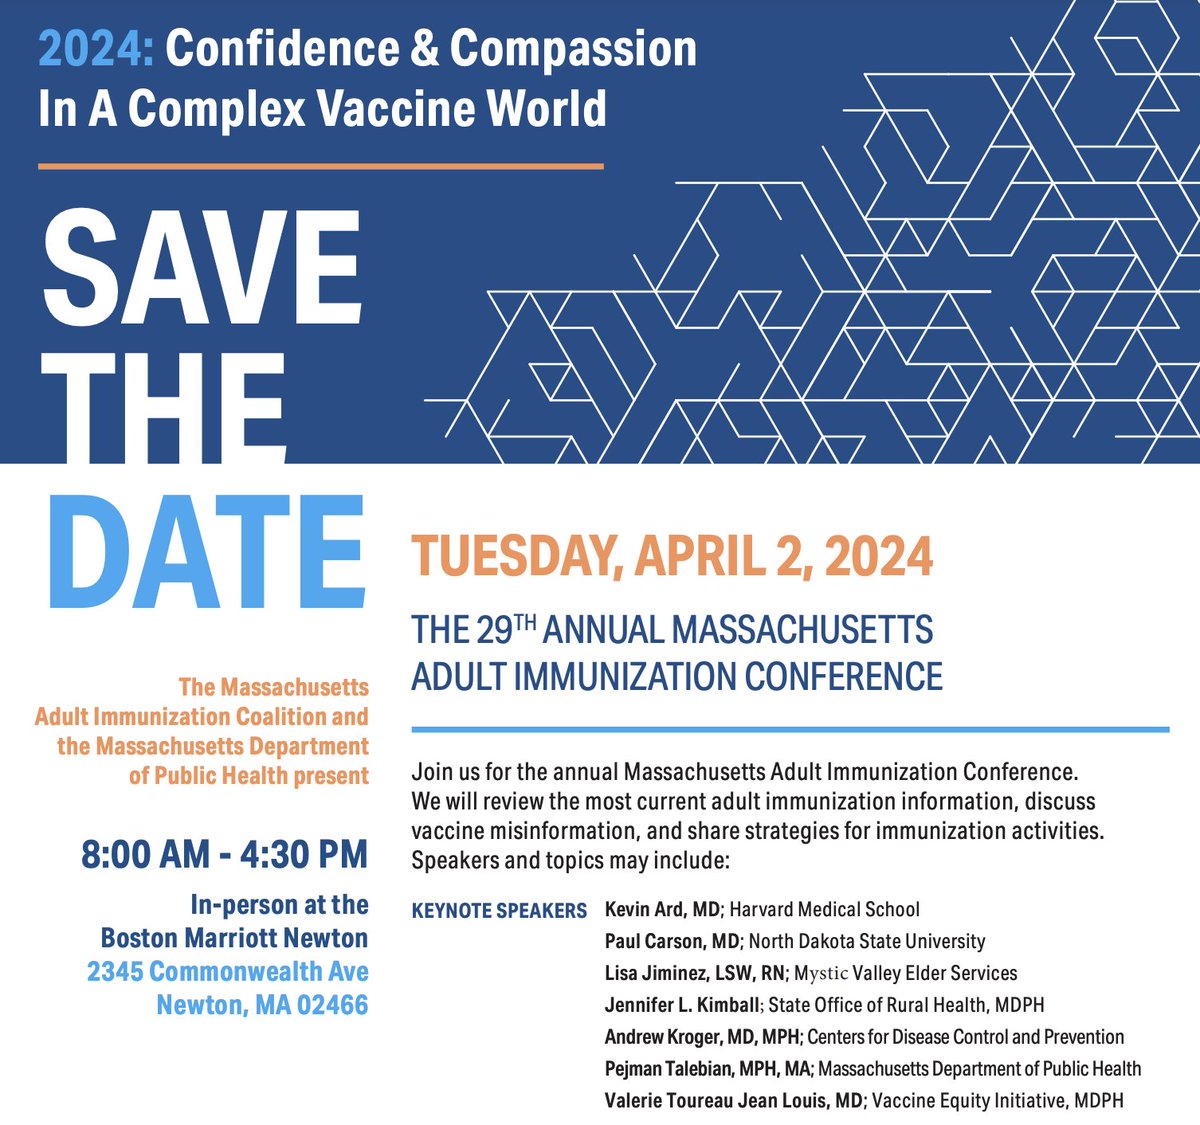 Please join @JSIhealth's MA Adult Immunization Coalition & @MassDPH on 4/2 for the 2024 Confidence & Compassion in a Complex Vaccine World Conference. Register today to hear from experts about emerging best practices for routine adult immunization. bit.ly/2024MAICConfer…